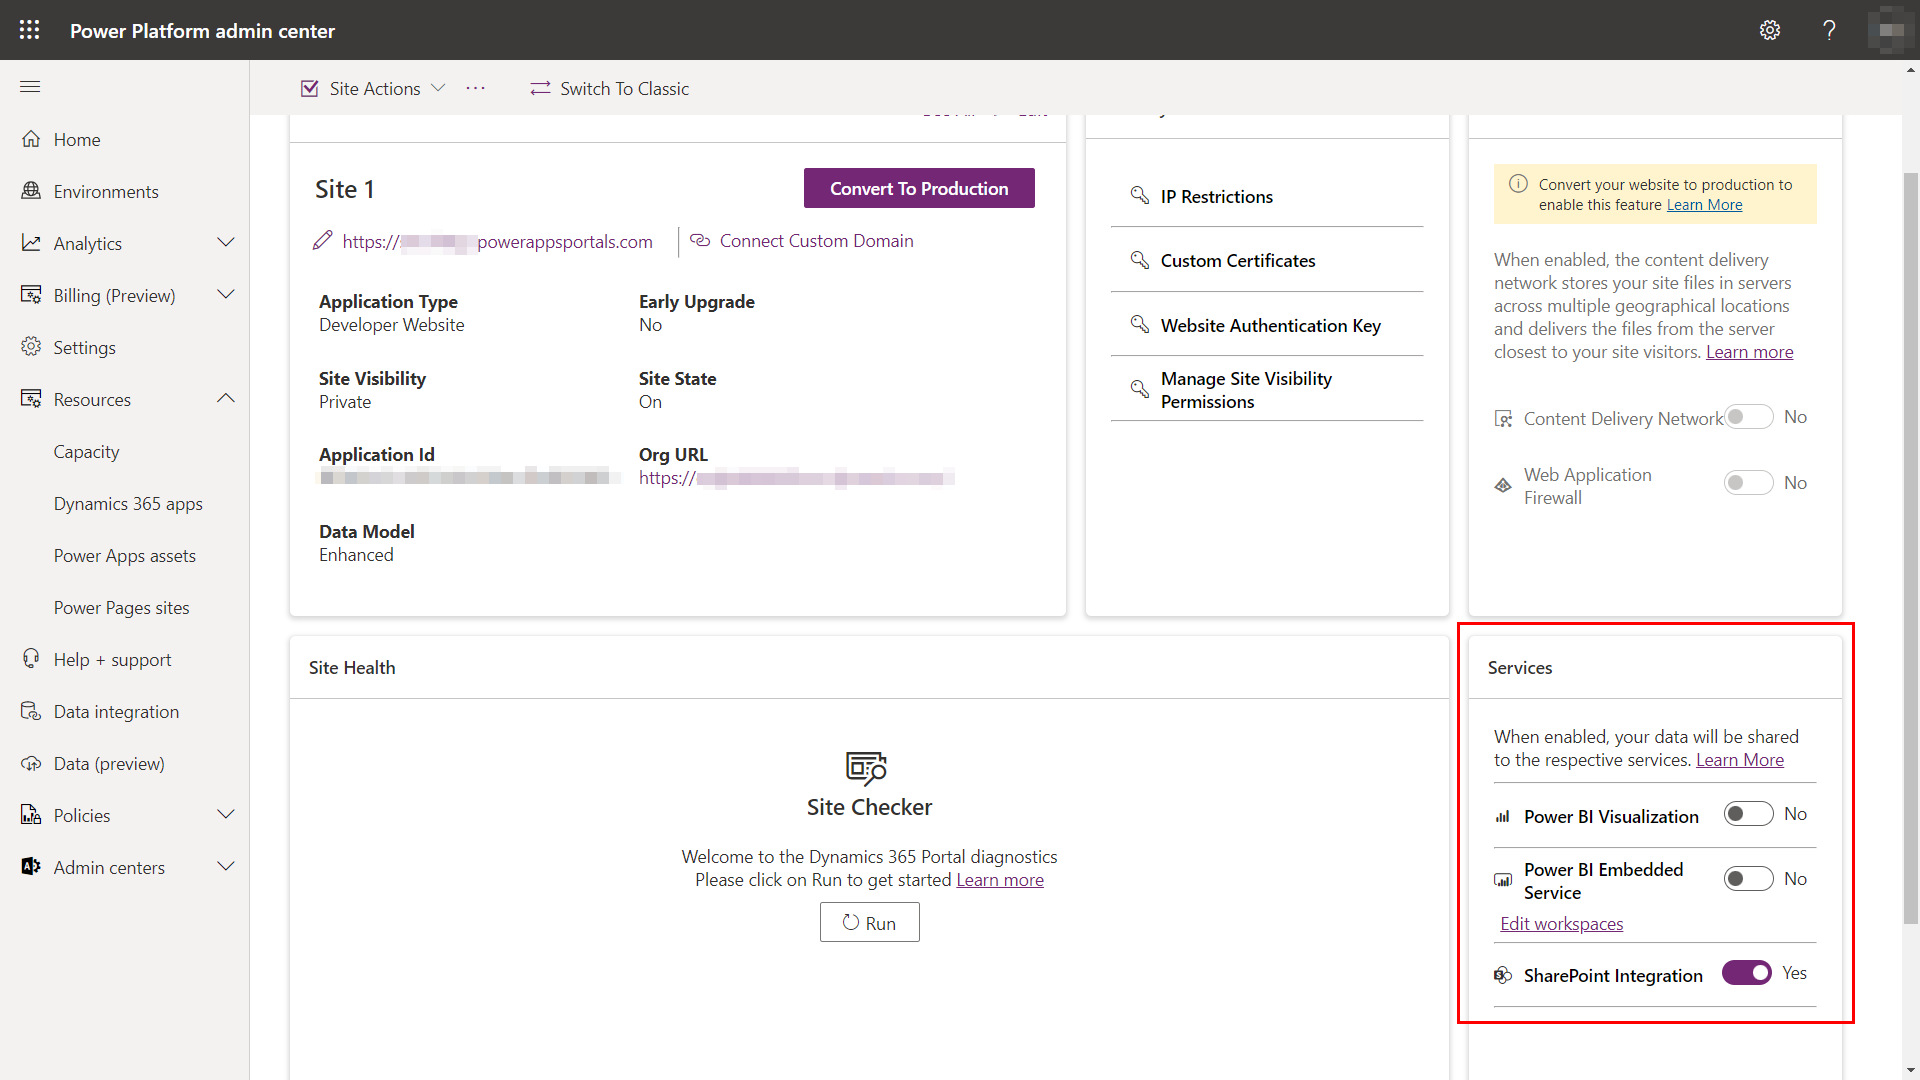 The services section of the Power Pages sites management options in Power Platform admin center.